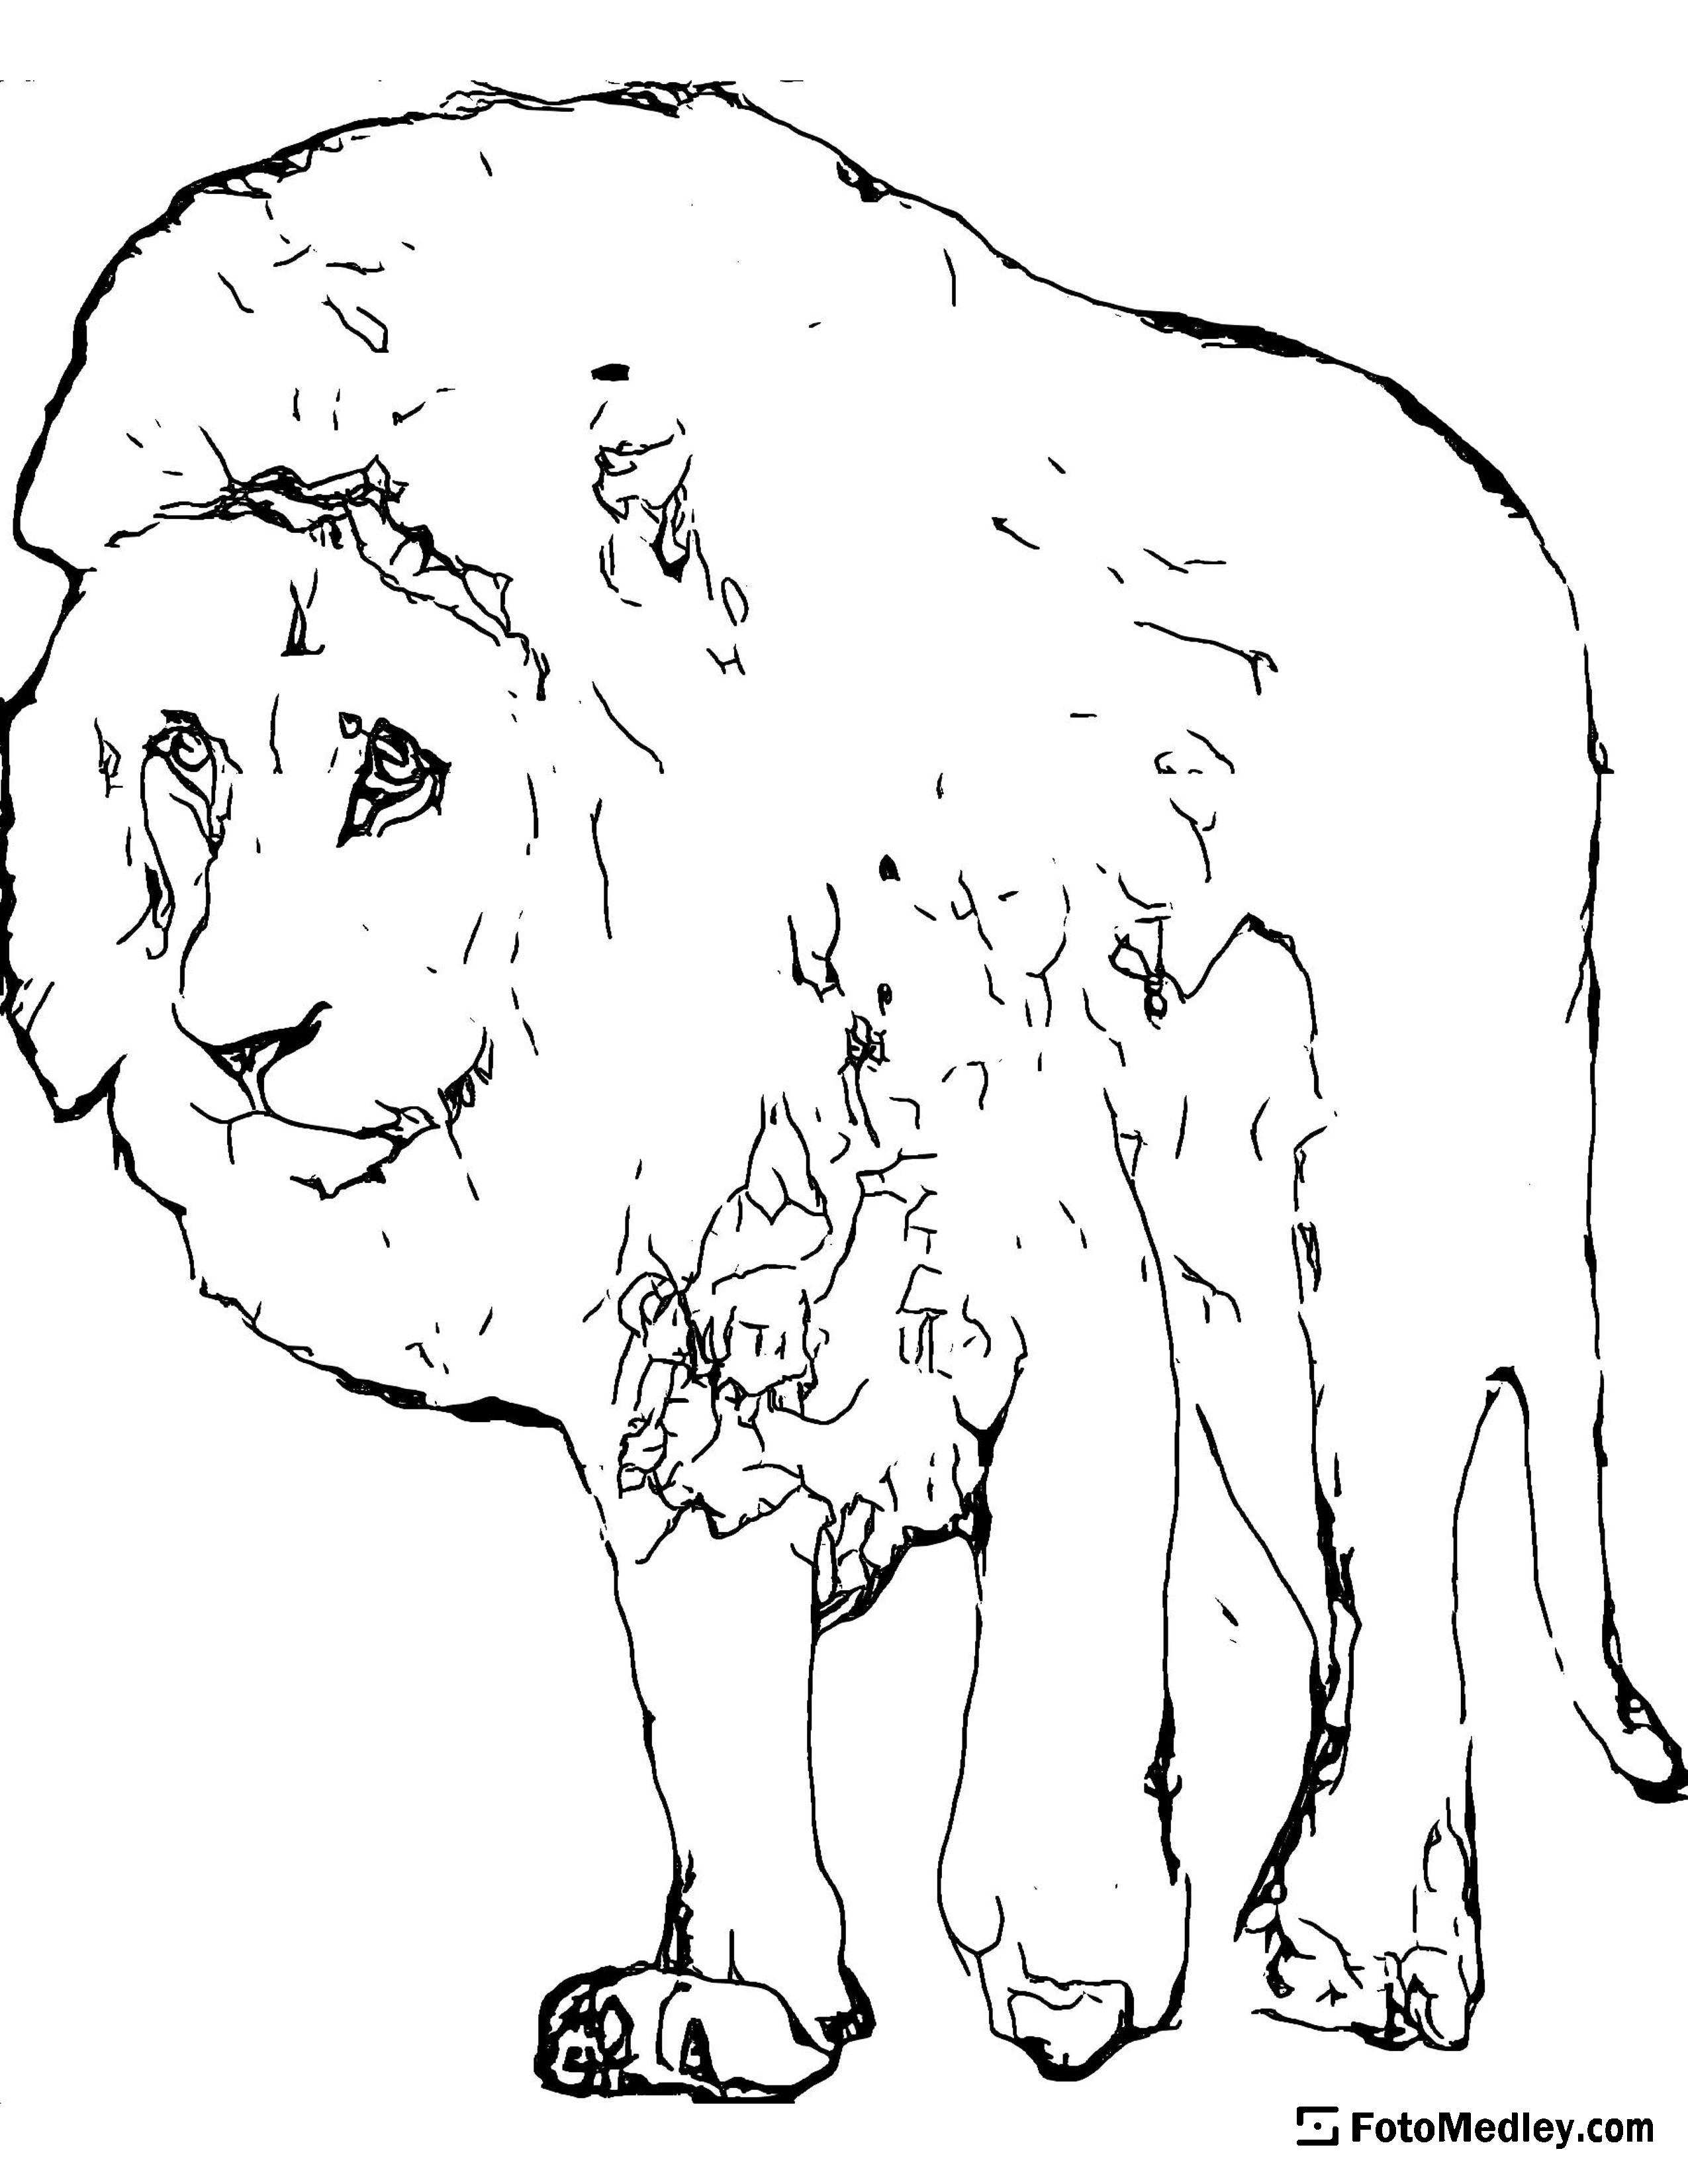 A coloring page of a large lion walking and looking forward.